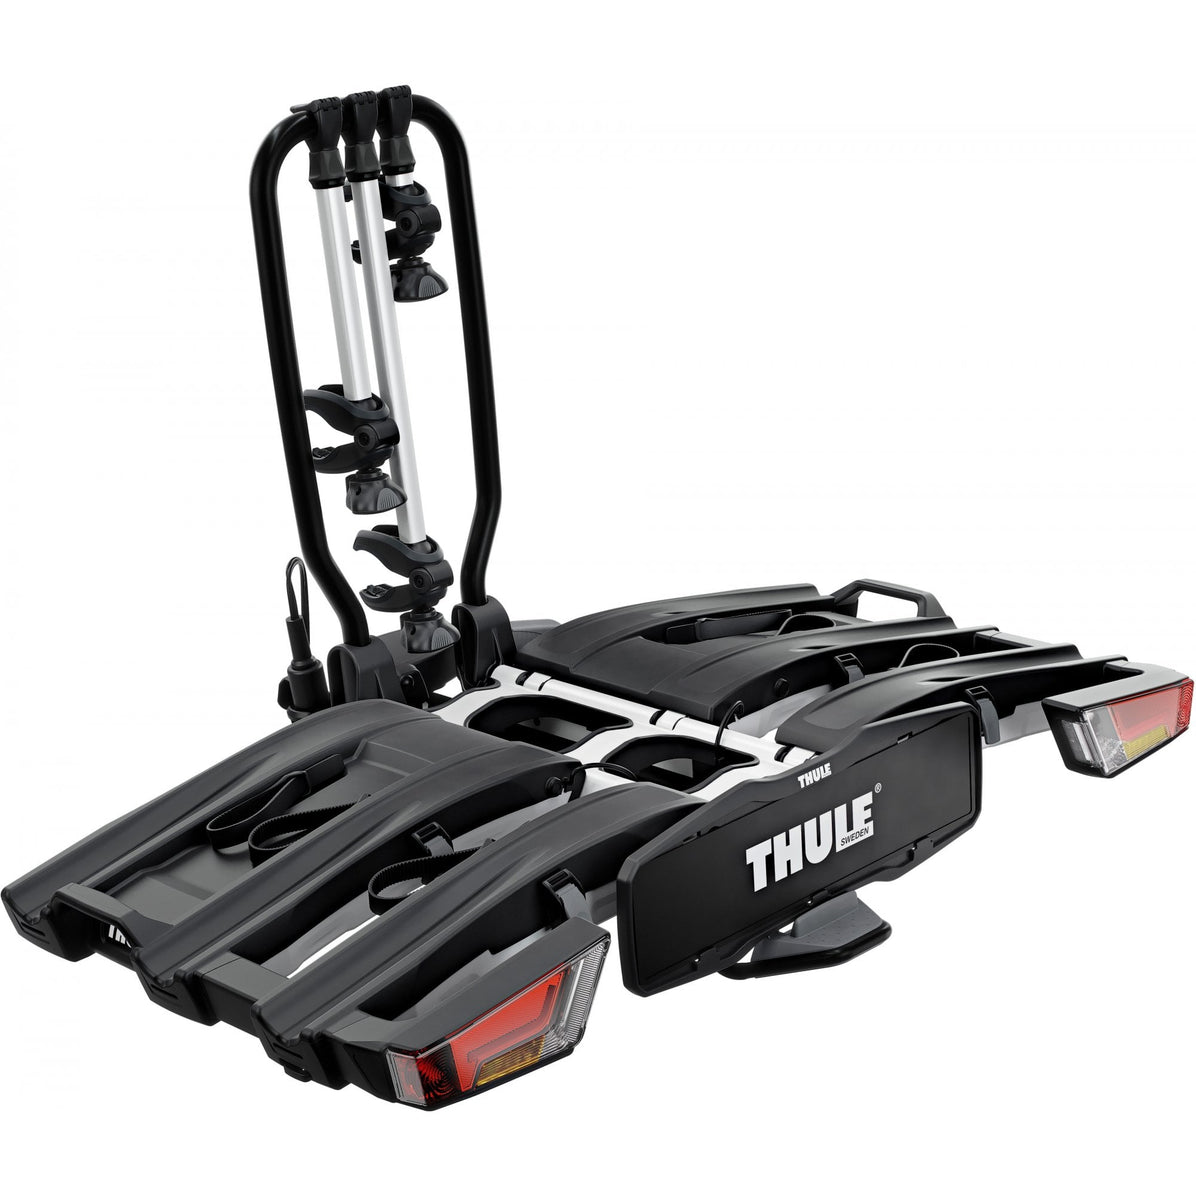 Thule 934 EasyFold XT 3-Bike Towball Carrier With AcuTight Torque Knobs